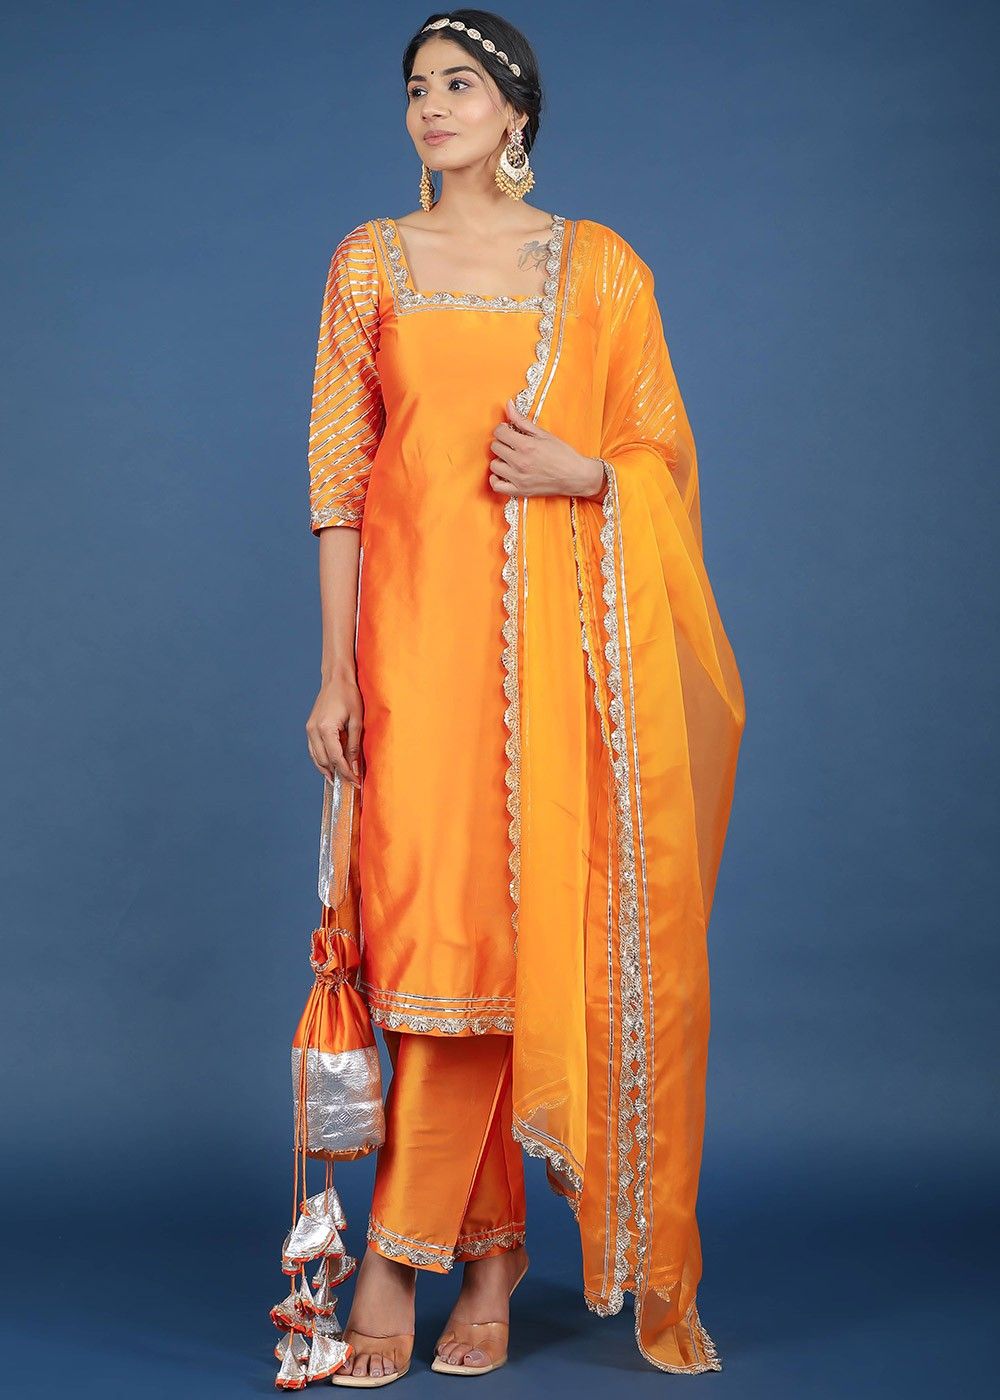 Buy Orange Ankle Pant Cotton Silk for Best Price, Reviews, Free